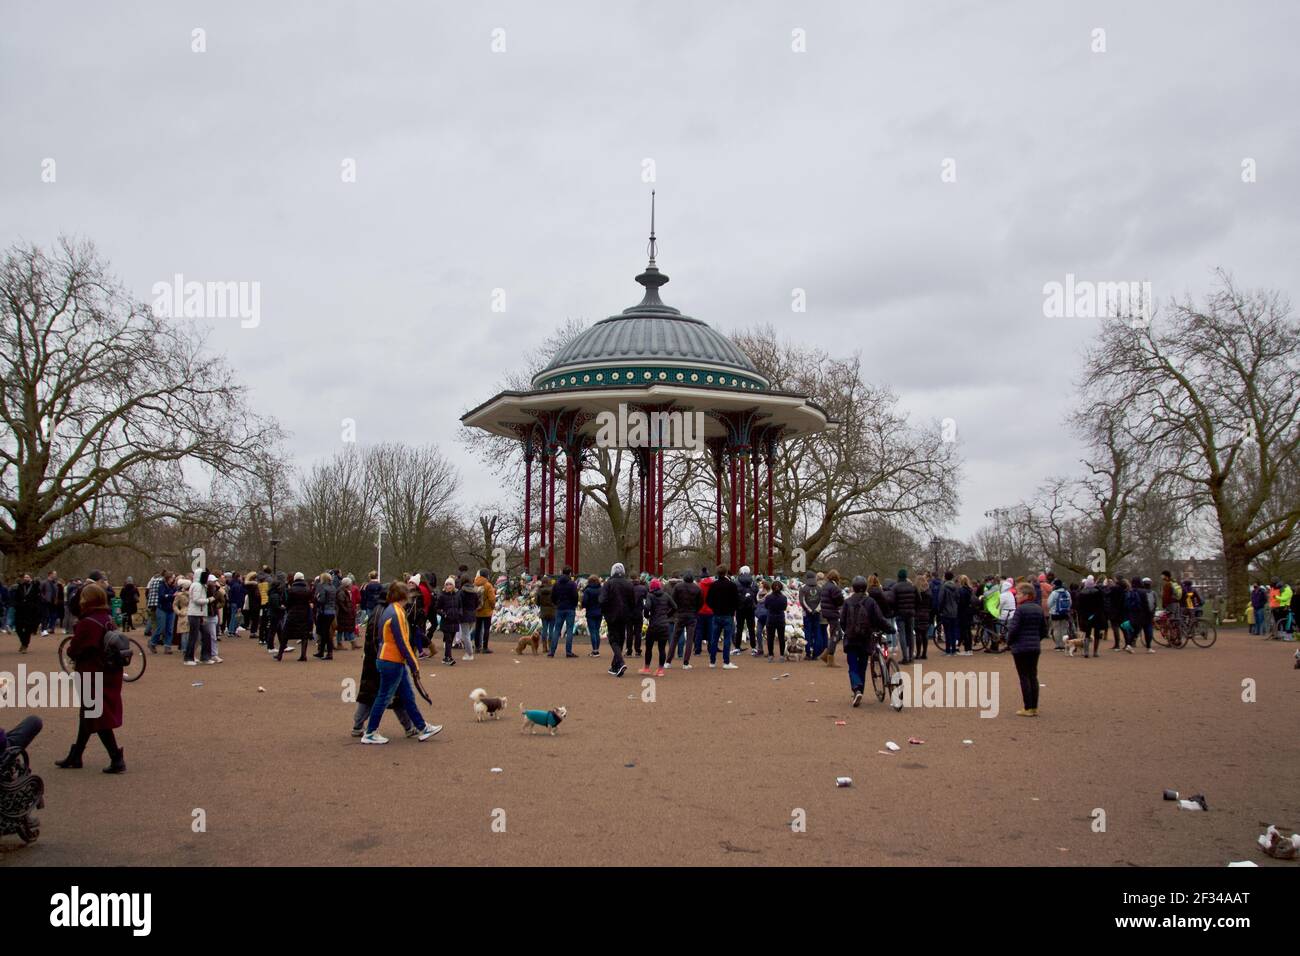 Crowds of people at Clapham Common Bandstand paying tribute to Sarah Everard Stock Photo